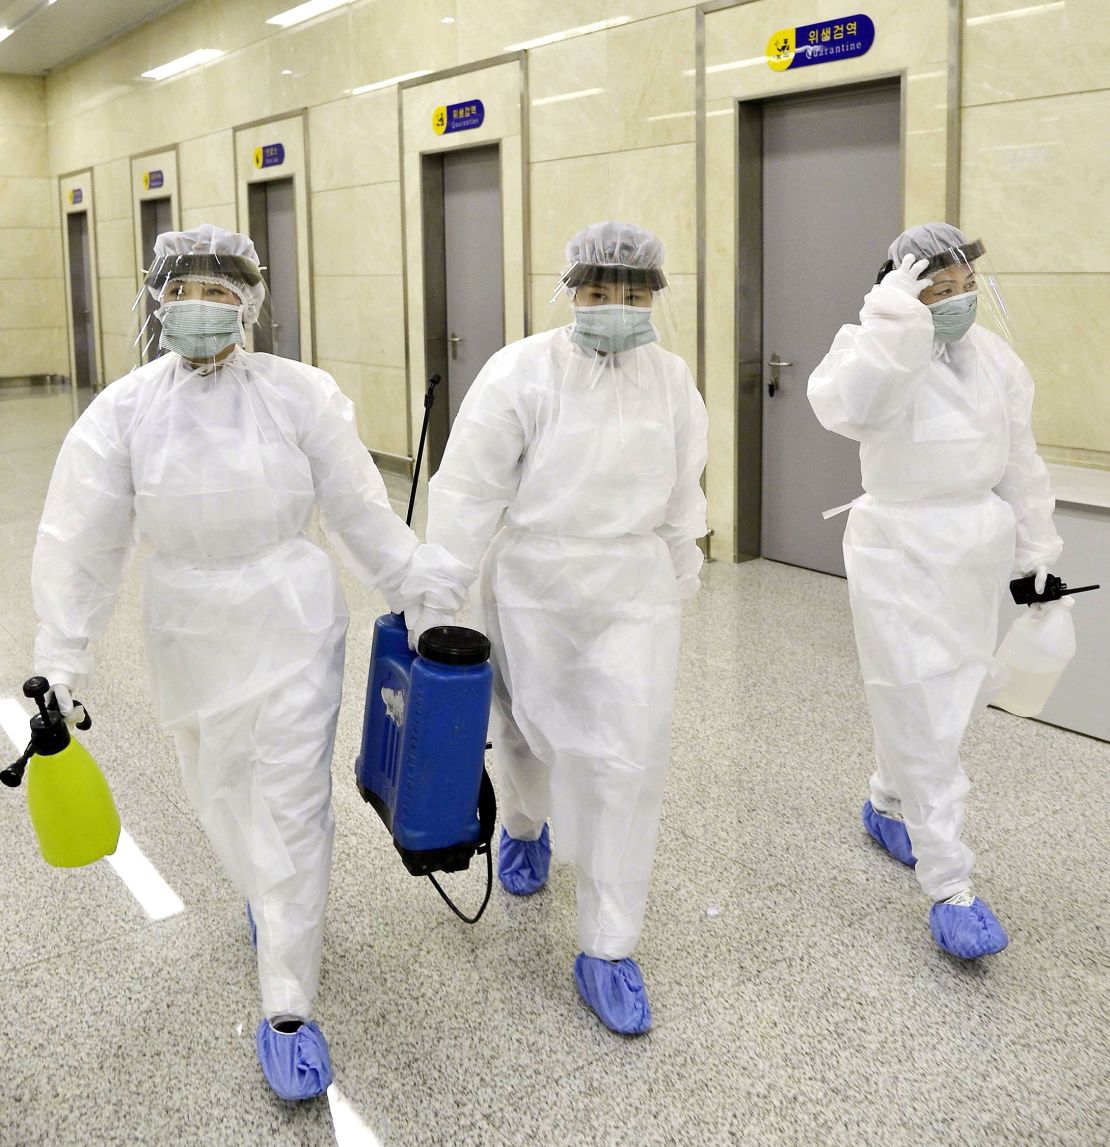 Quarantine staff in protective gear are pictured at Pyongyang International Airport on Saturday.